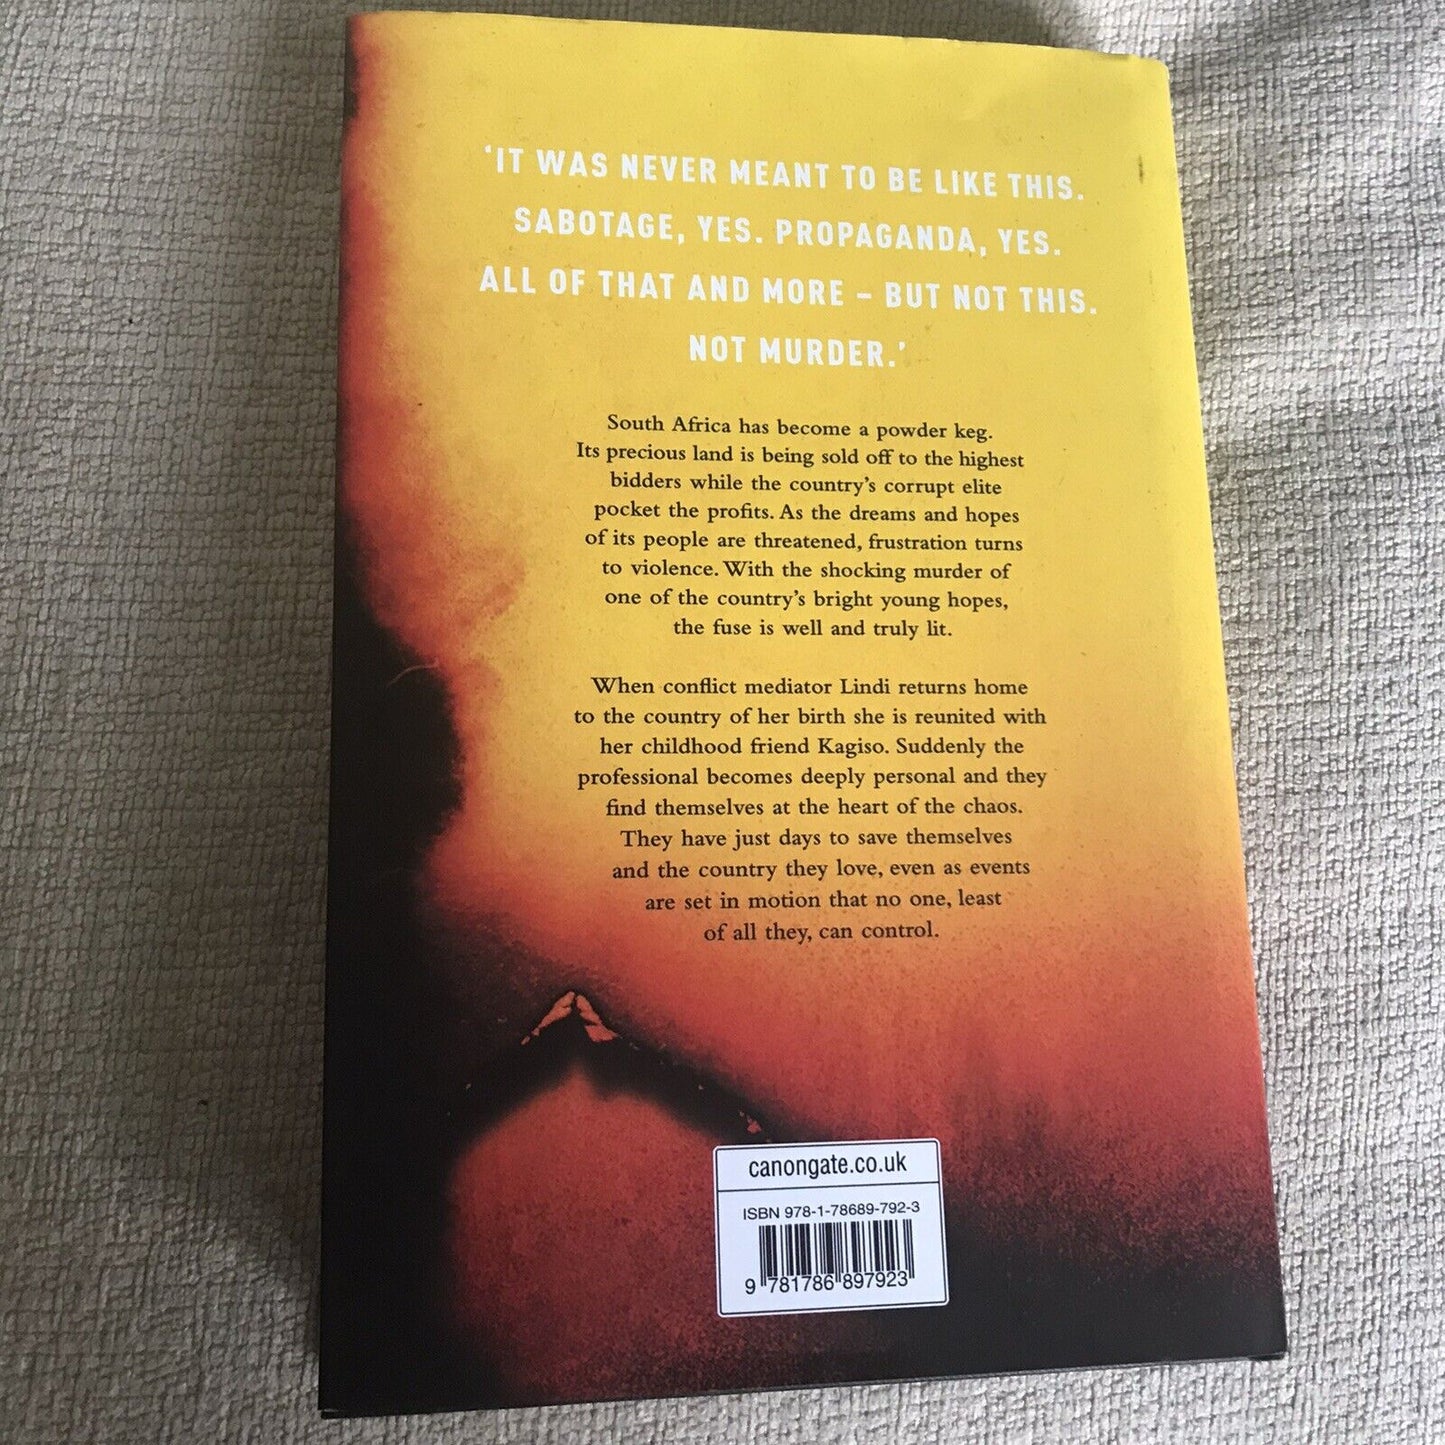 2019*SIGNED 1st* The Burning Land - George Alagiah (Canongate)